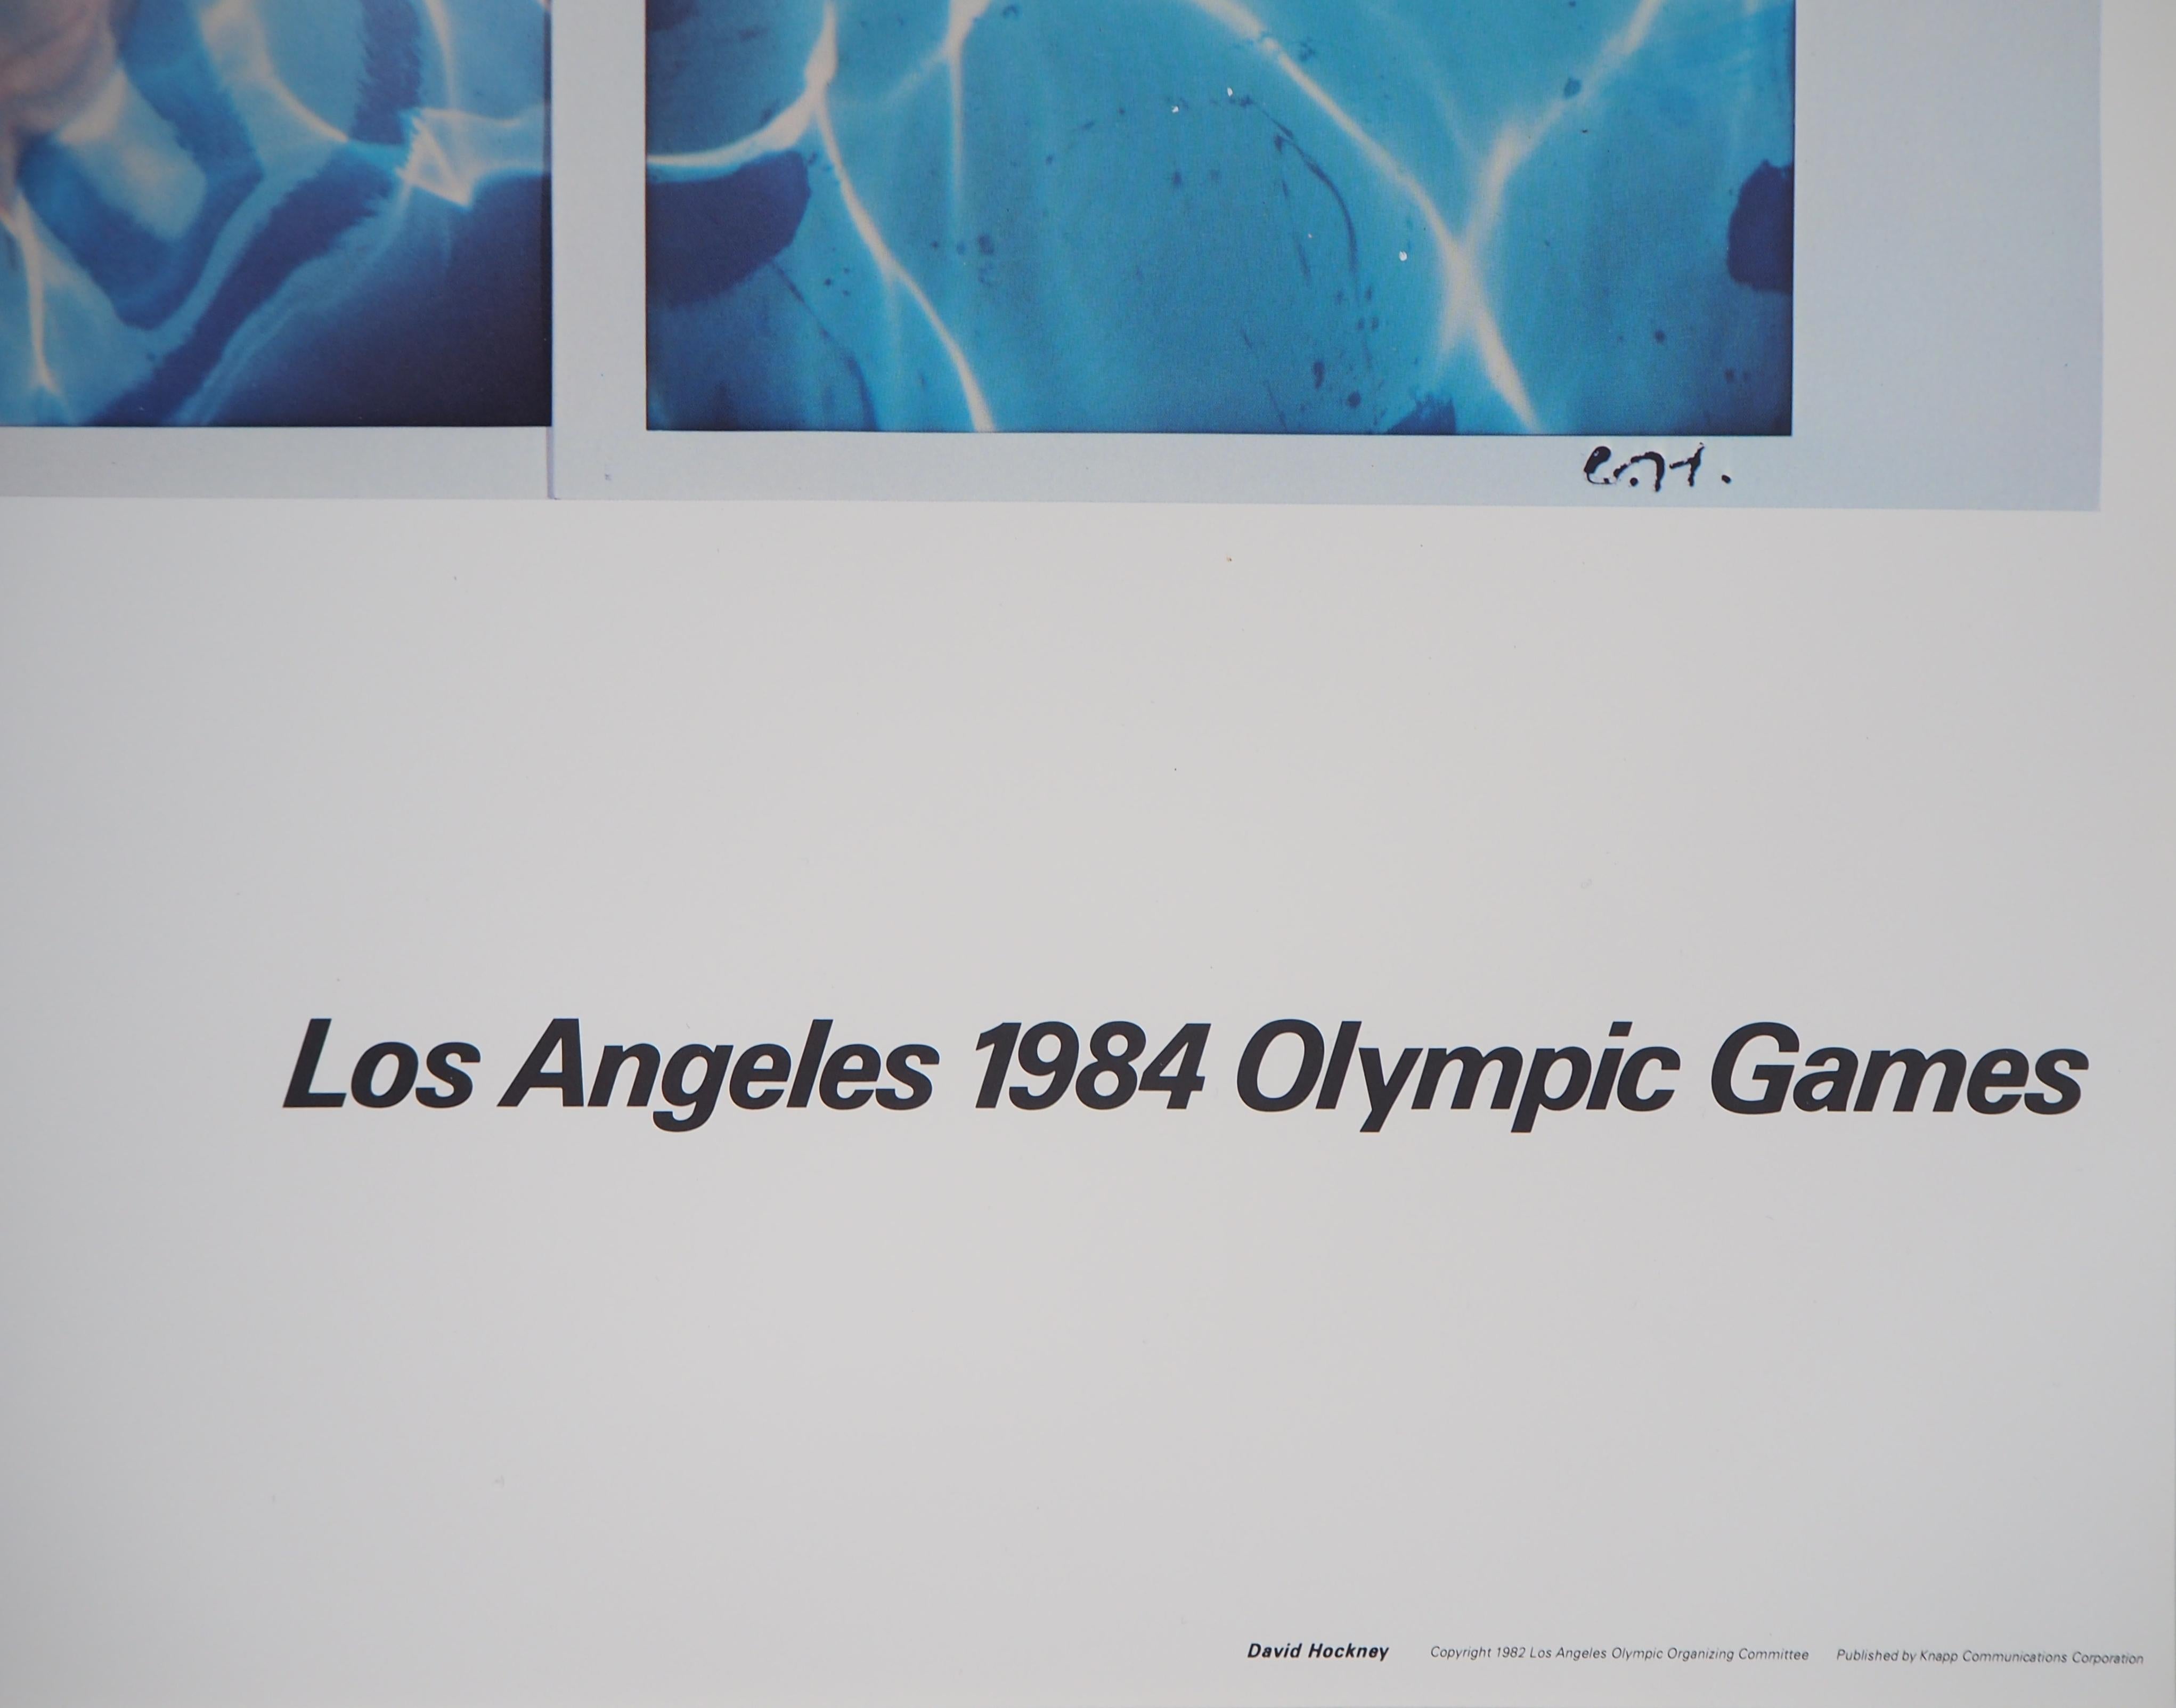 Swimmer / Pool Diver - Offset Lithograph (Olympic Games, Los Angeles 1984) 1